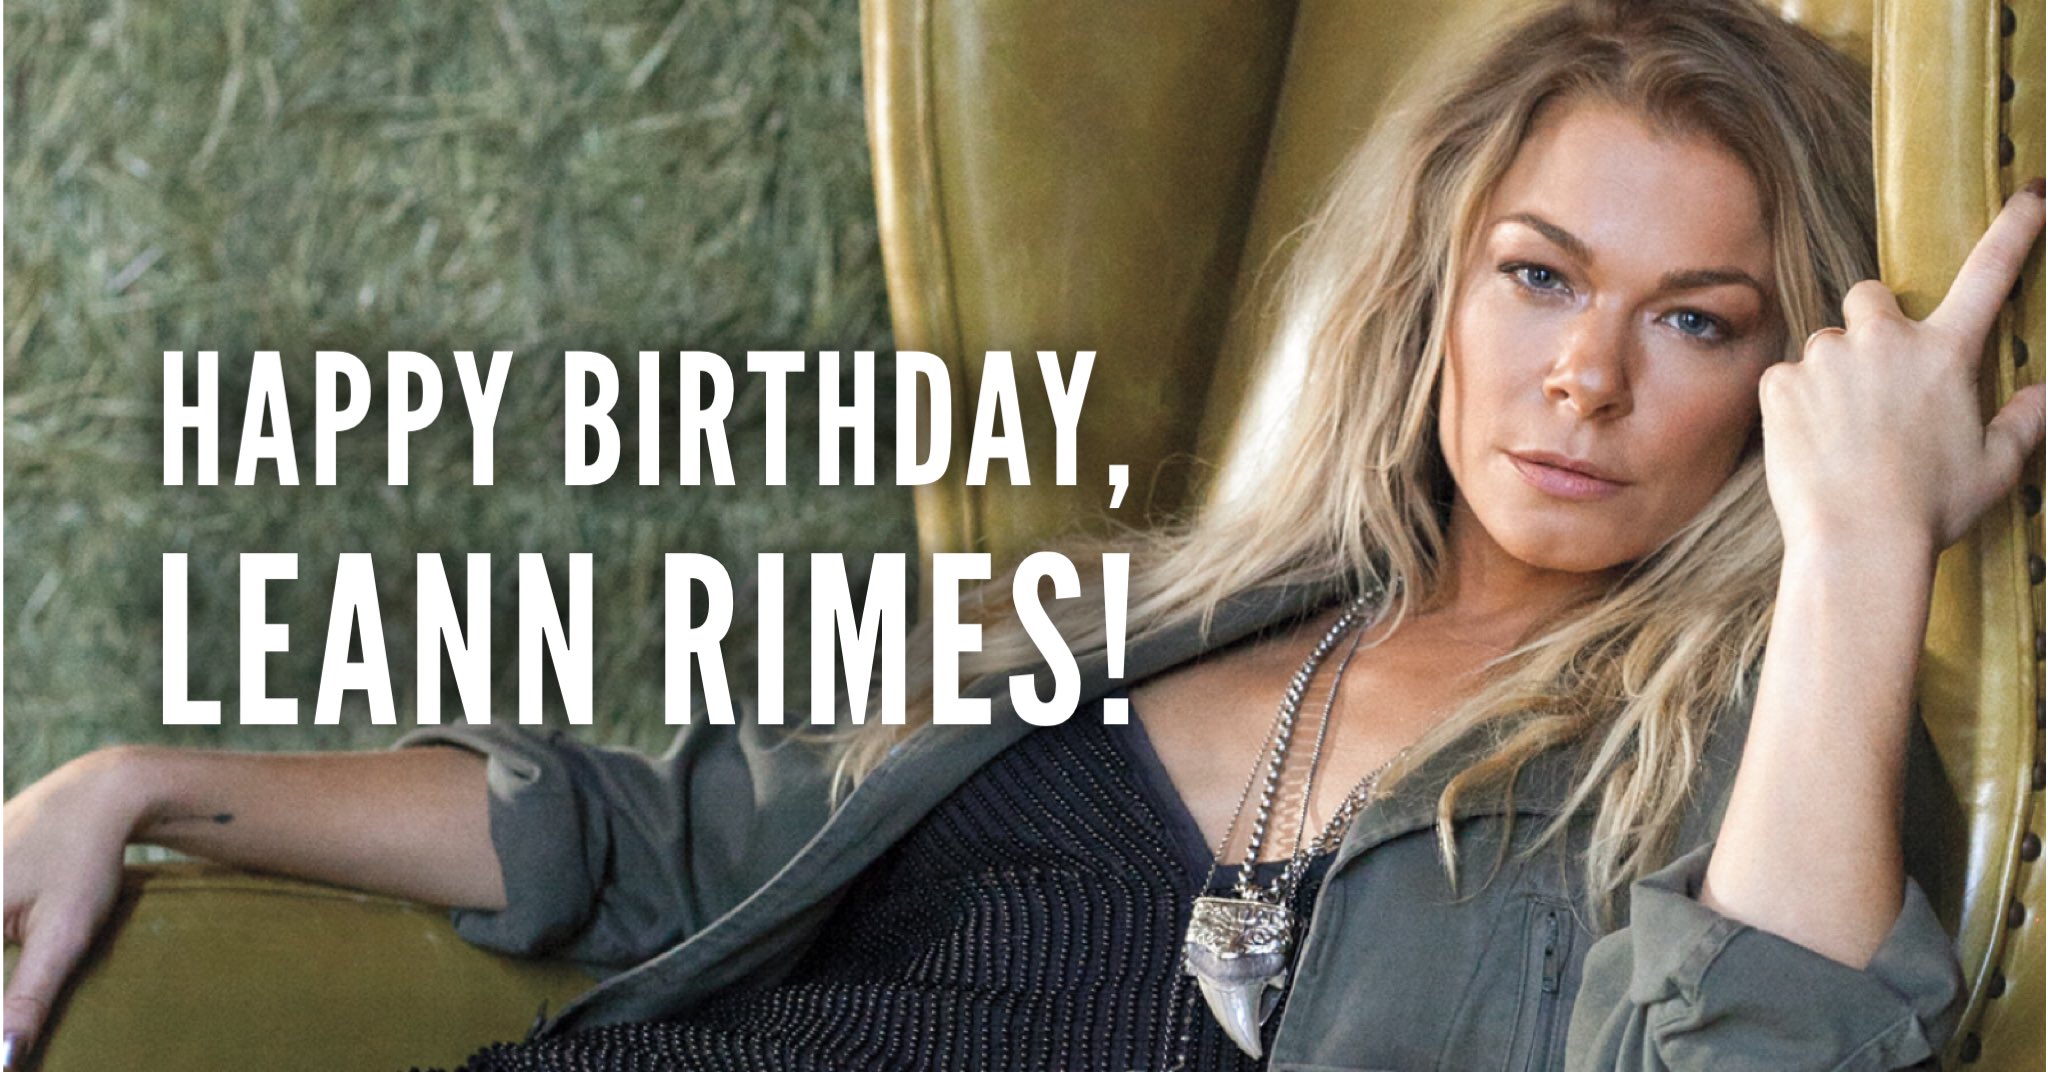 Happy Birthday to LeAnn Rimes! What s your favorite hit of hers?  